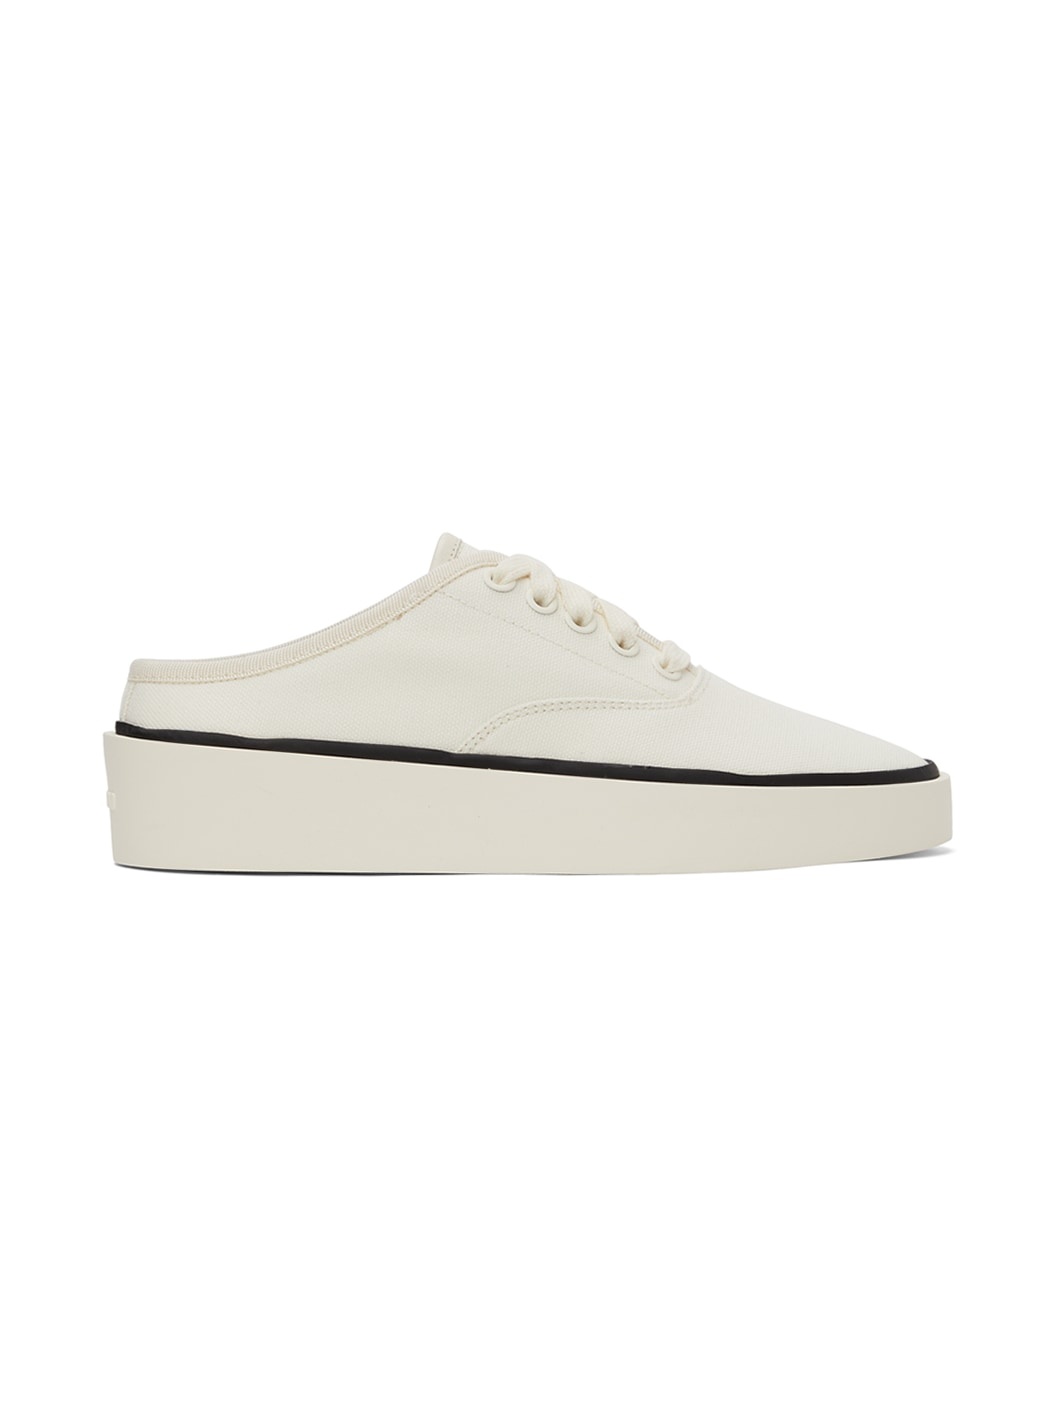 White Canvas 101 Backless Sneakers - 1